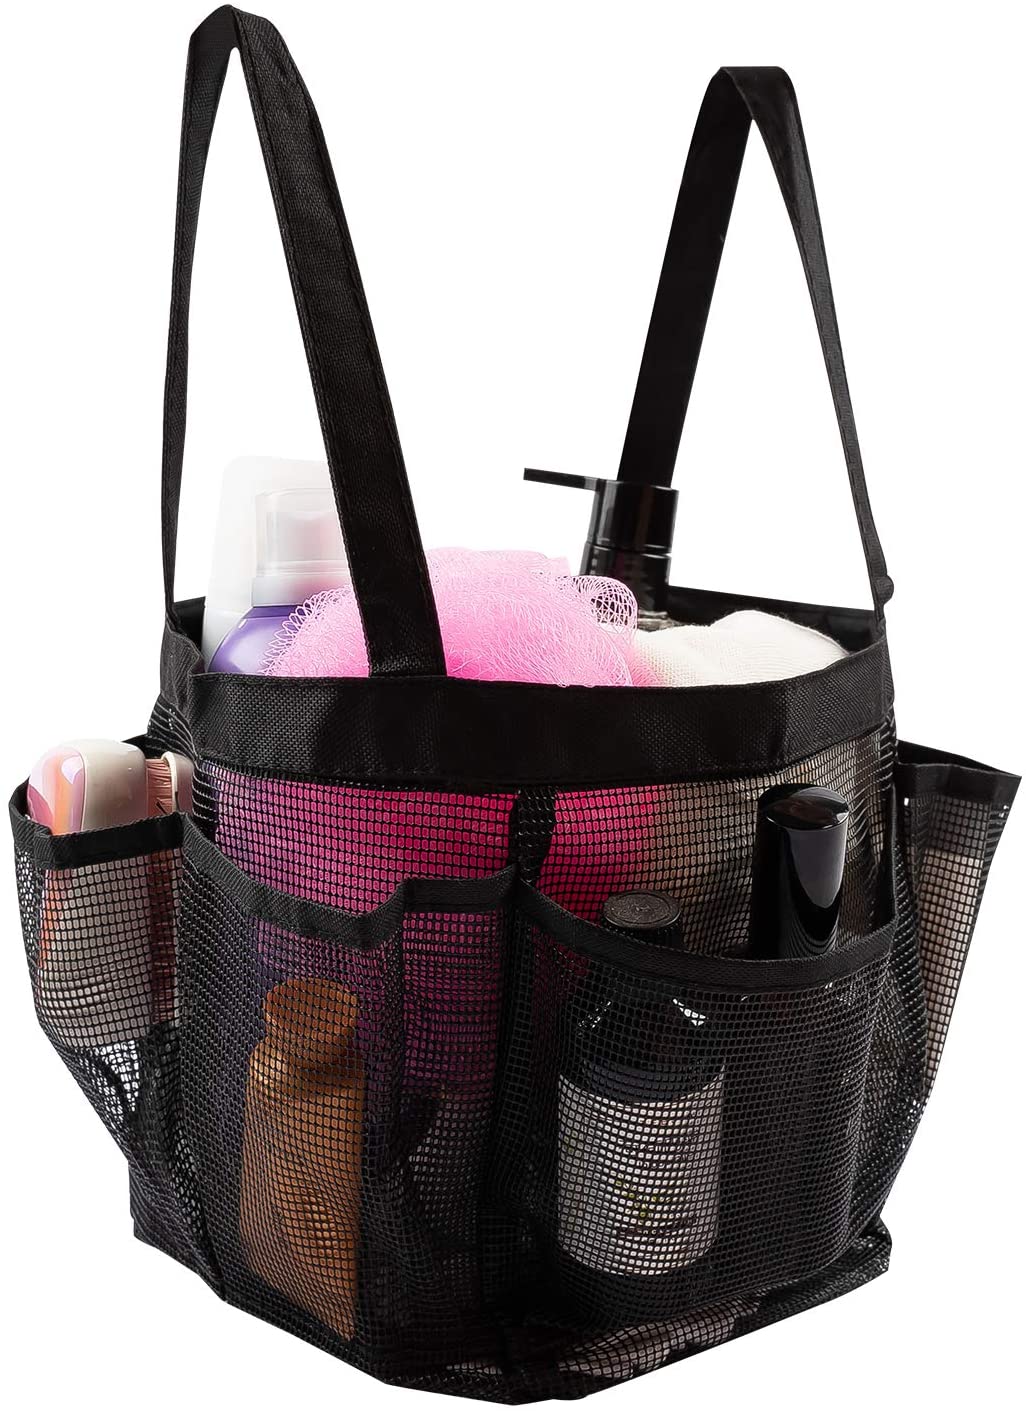 Mesh Shower Caddy Tote With 8 Mesh Storage Pockets, Quick Dry Tote Bag, Oxford Hanging Toiletry and Bath Organizer For Gym Dorm athroom Shower Caddy Accessory Case Washing Bag With Handles - Black